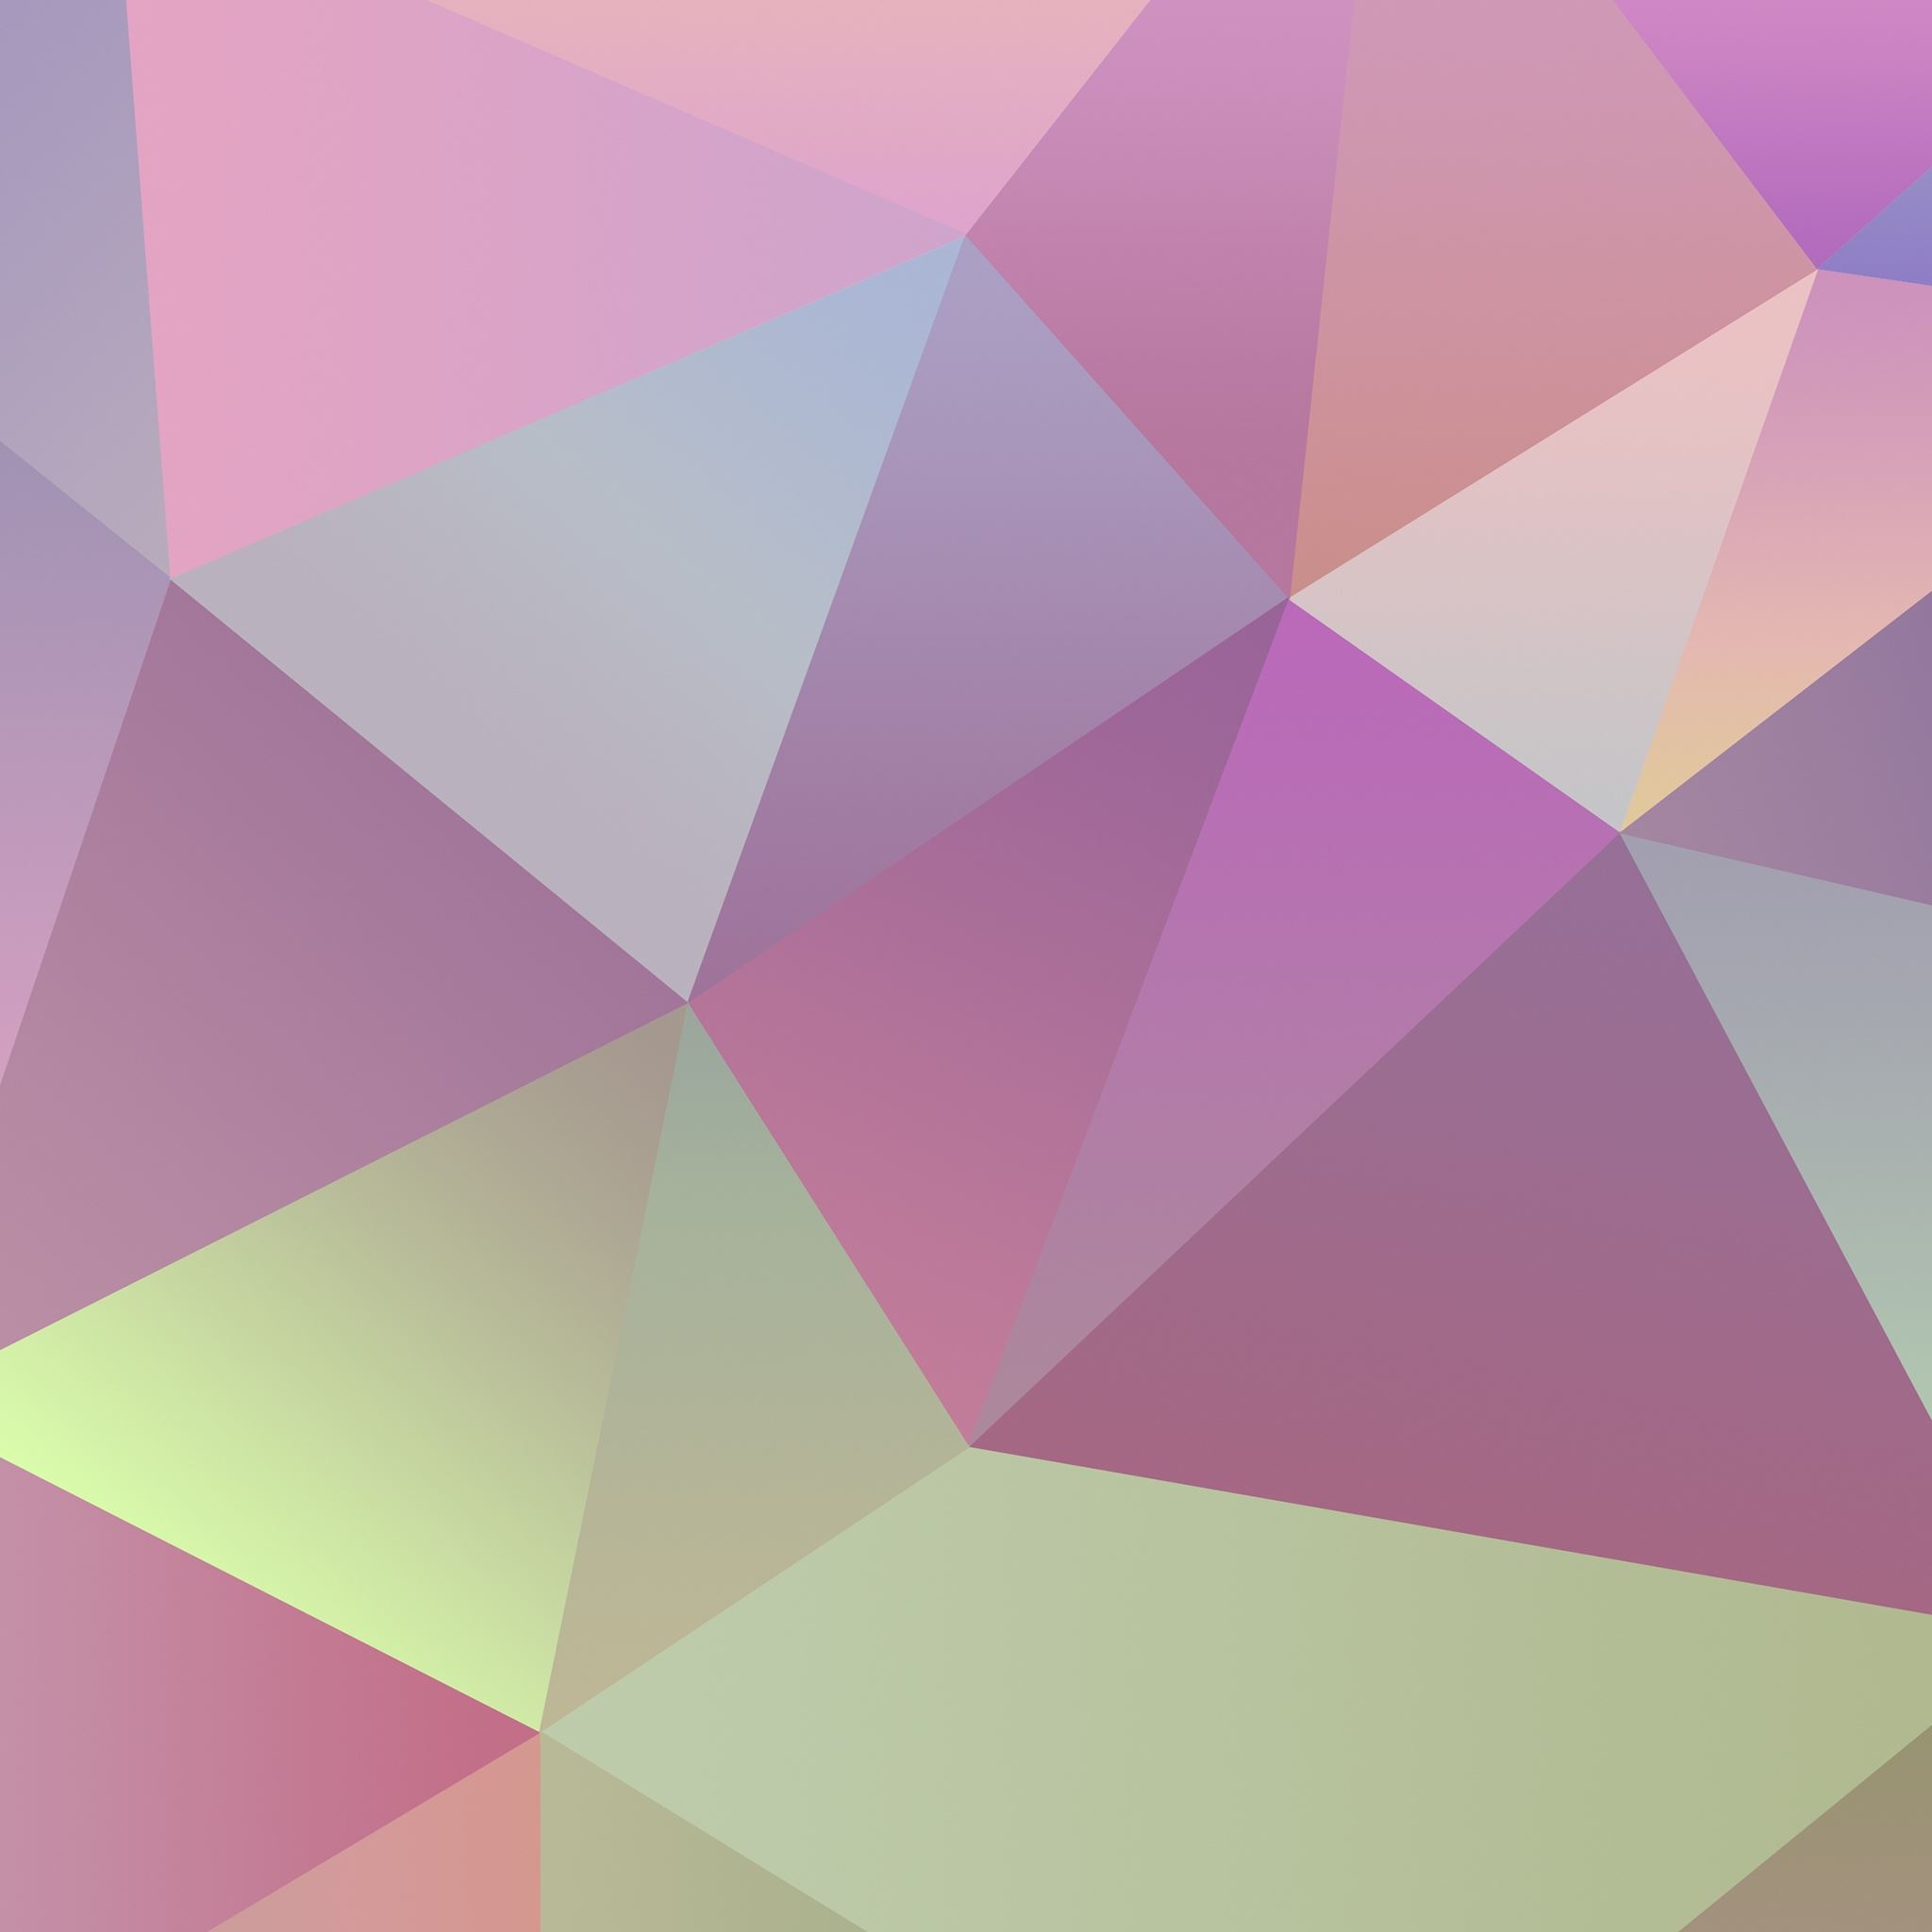 Colorful Folded Triangles iOS 7 Pattern Background iPad Air wallpaper 